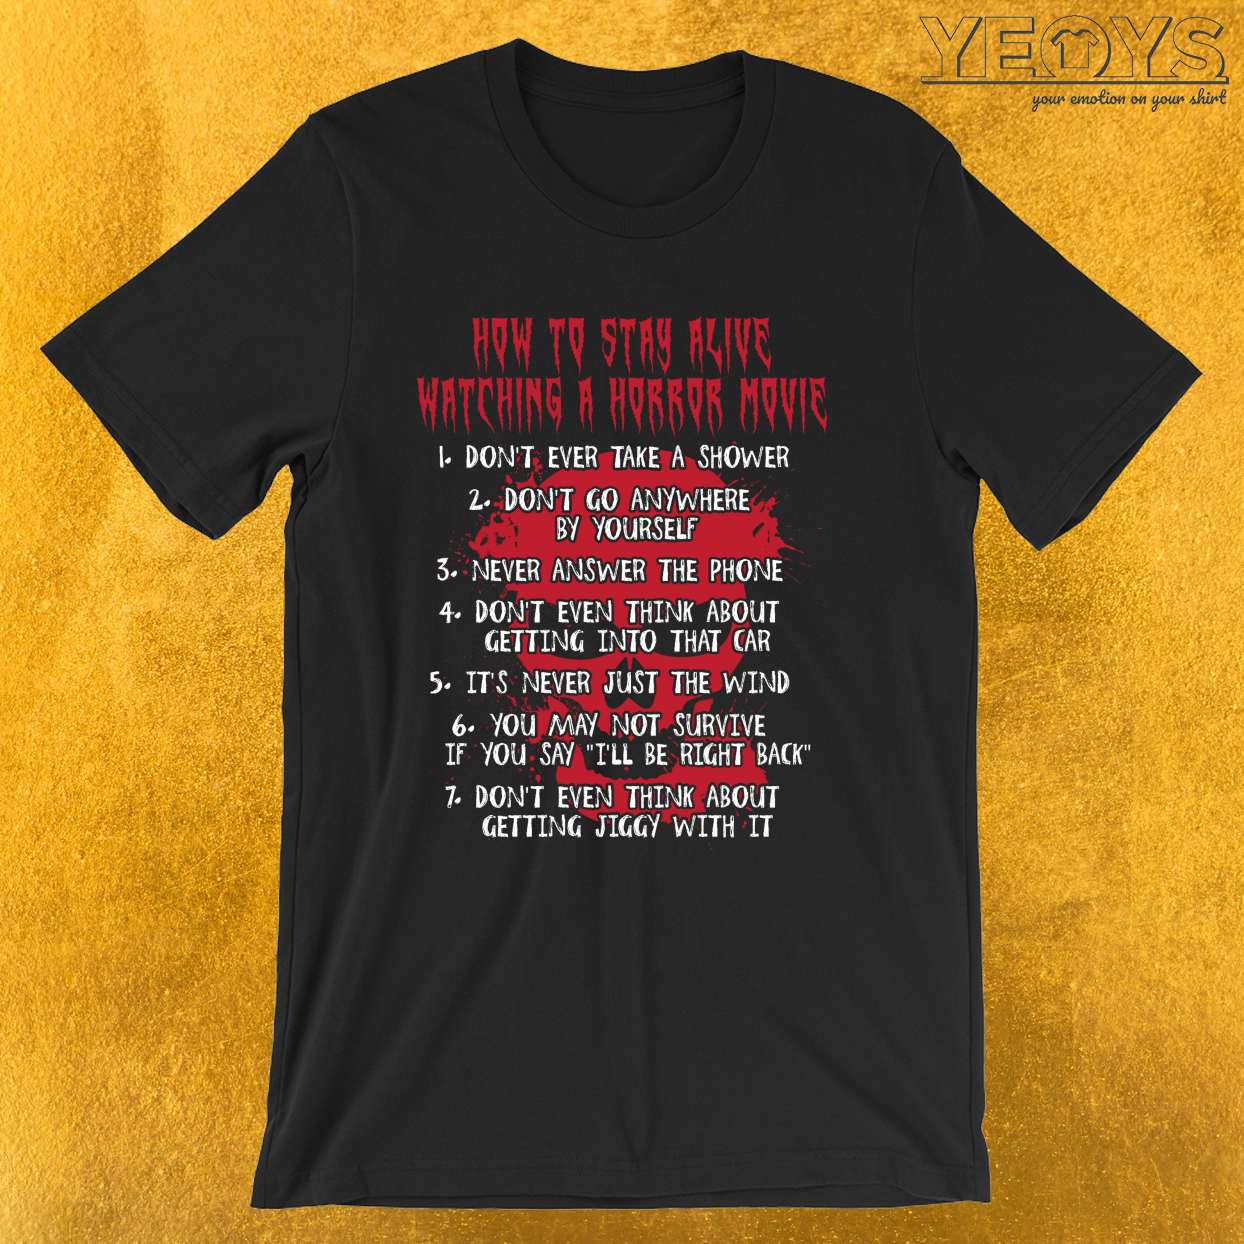 How To Stay Alive Watching A Horror Movie – Funny Horror Movie Tee